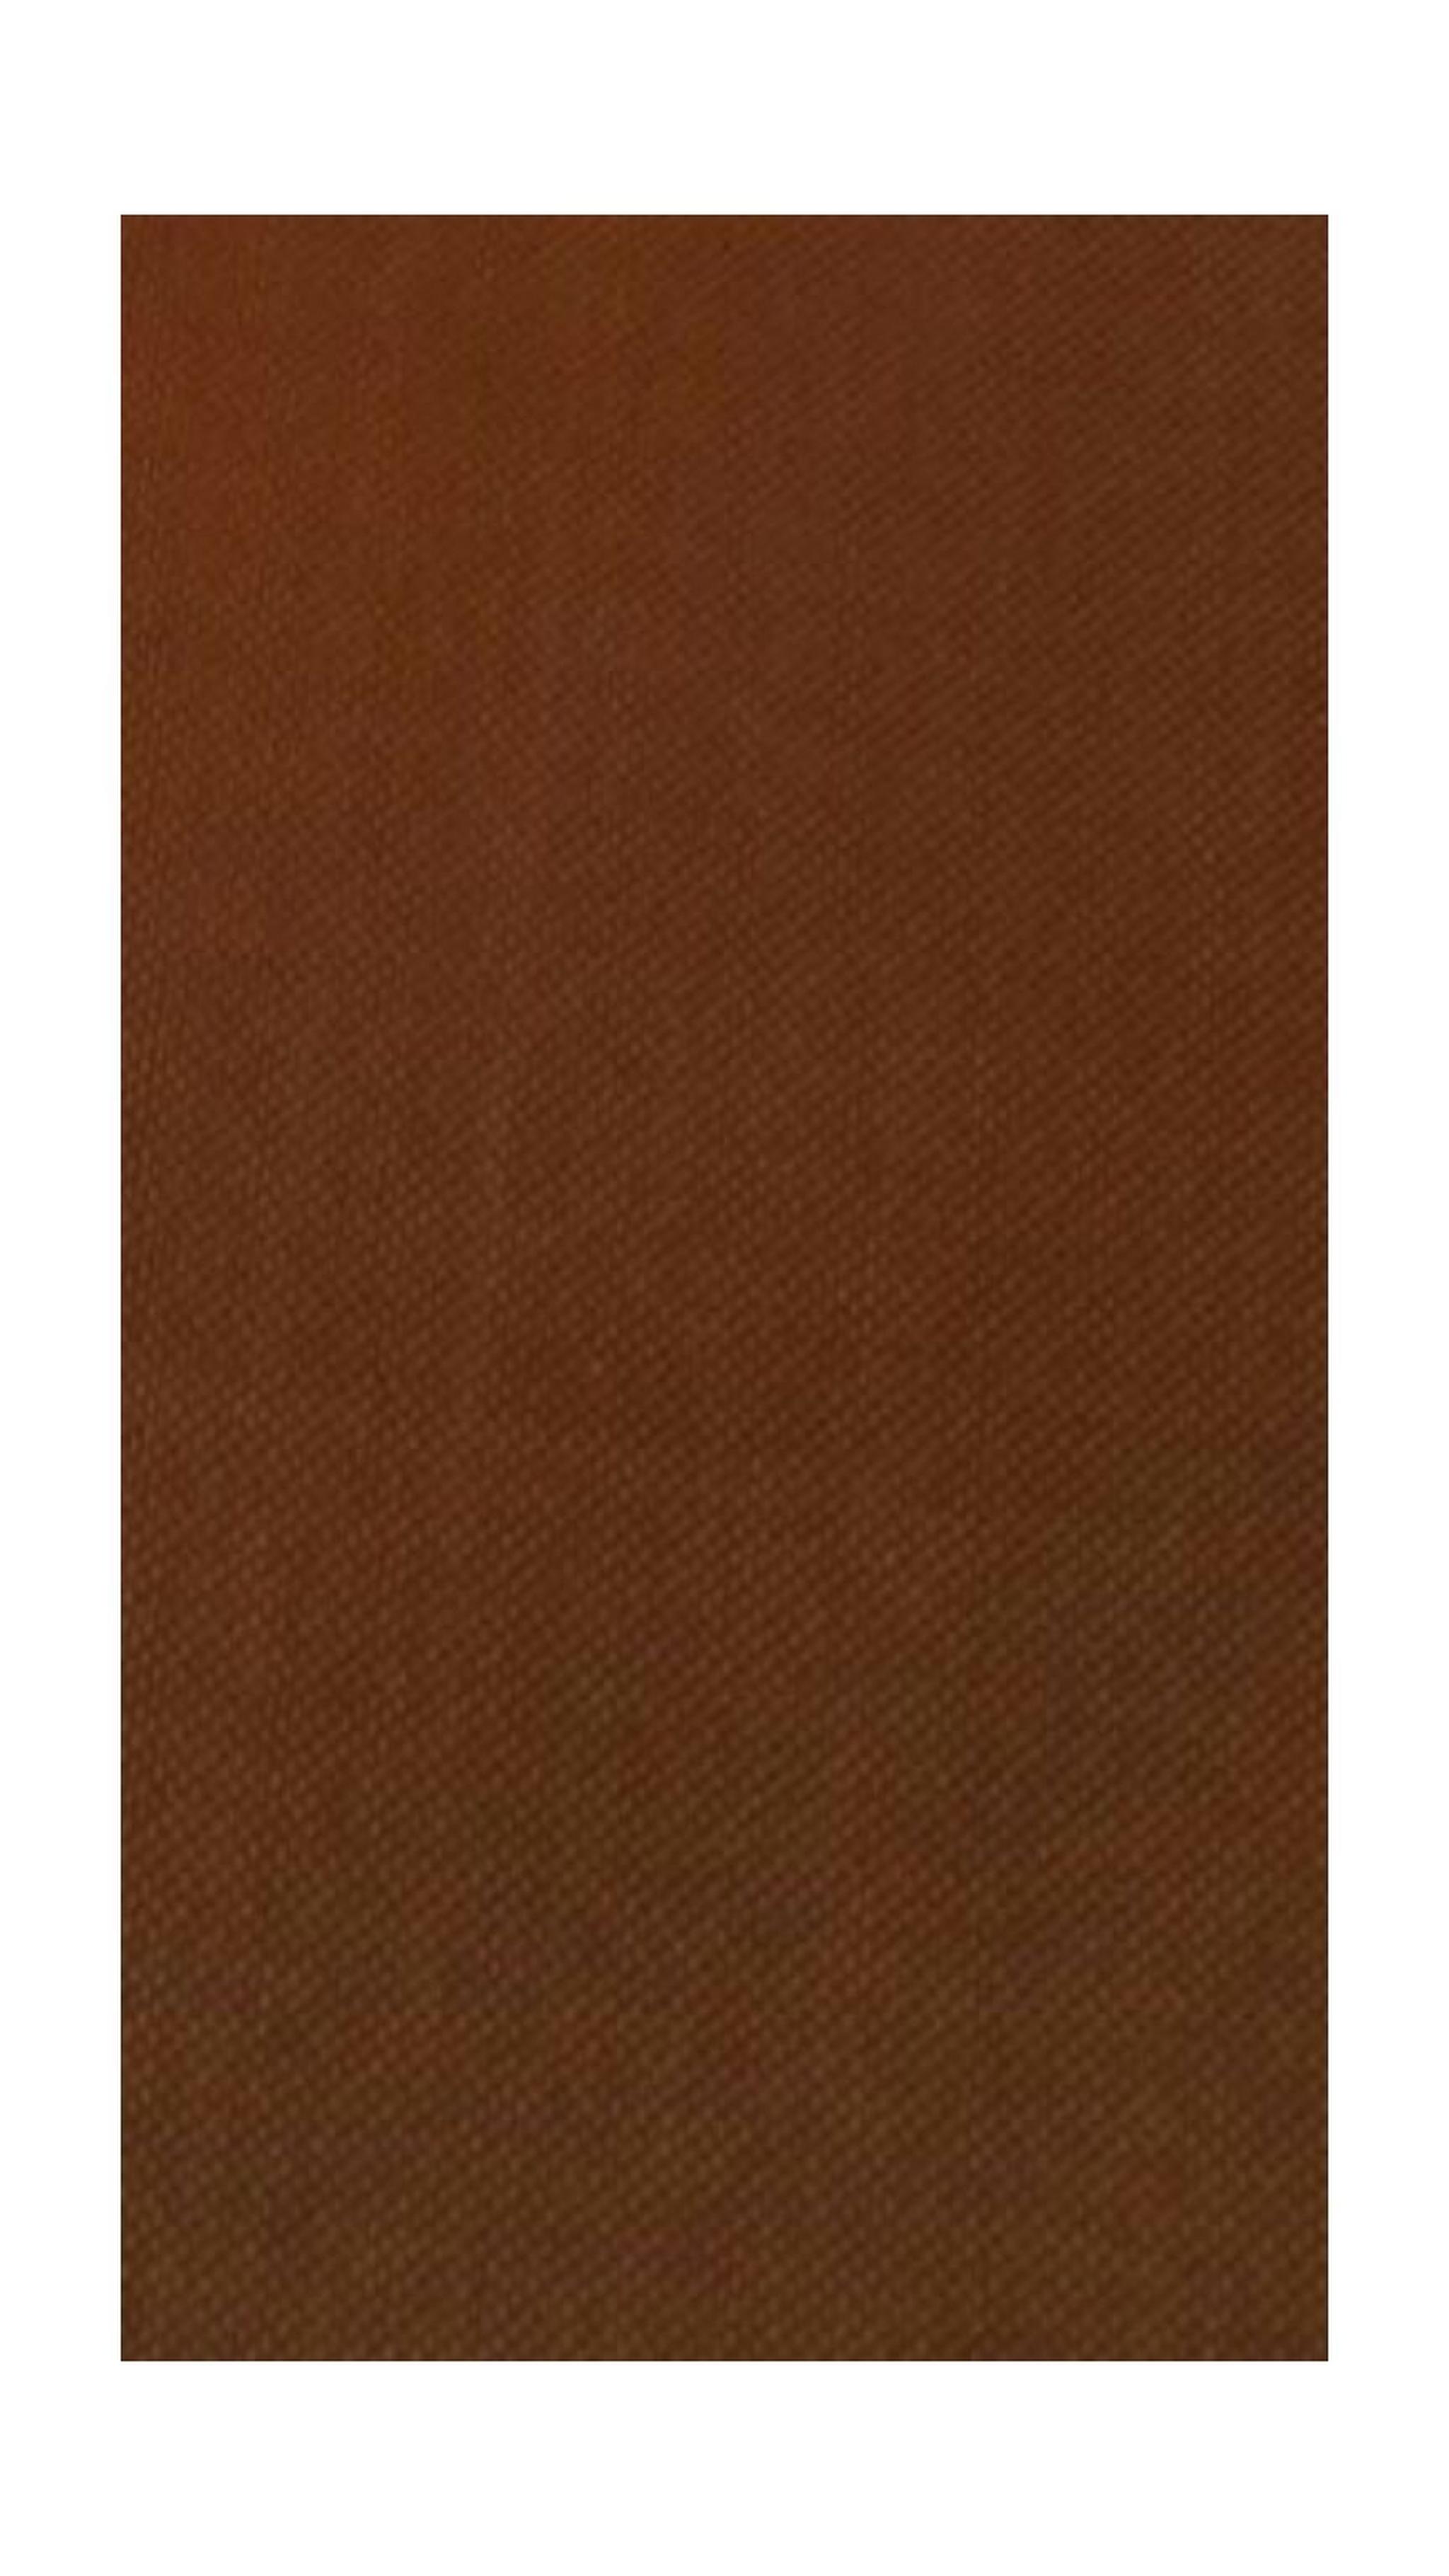 Extra Joy Front Load Washing Machine Cover - Brown